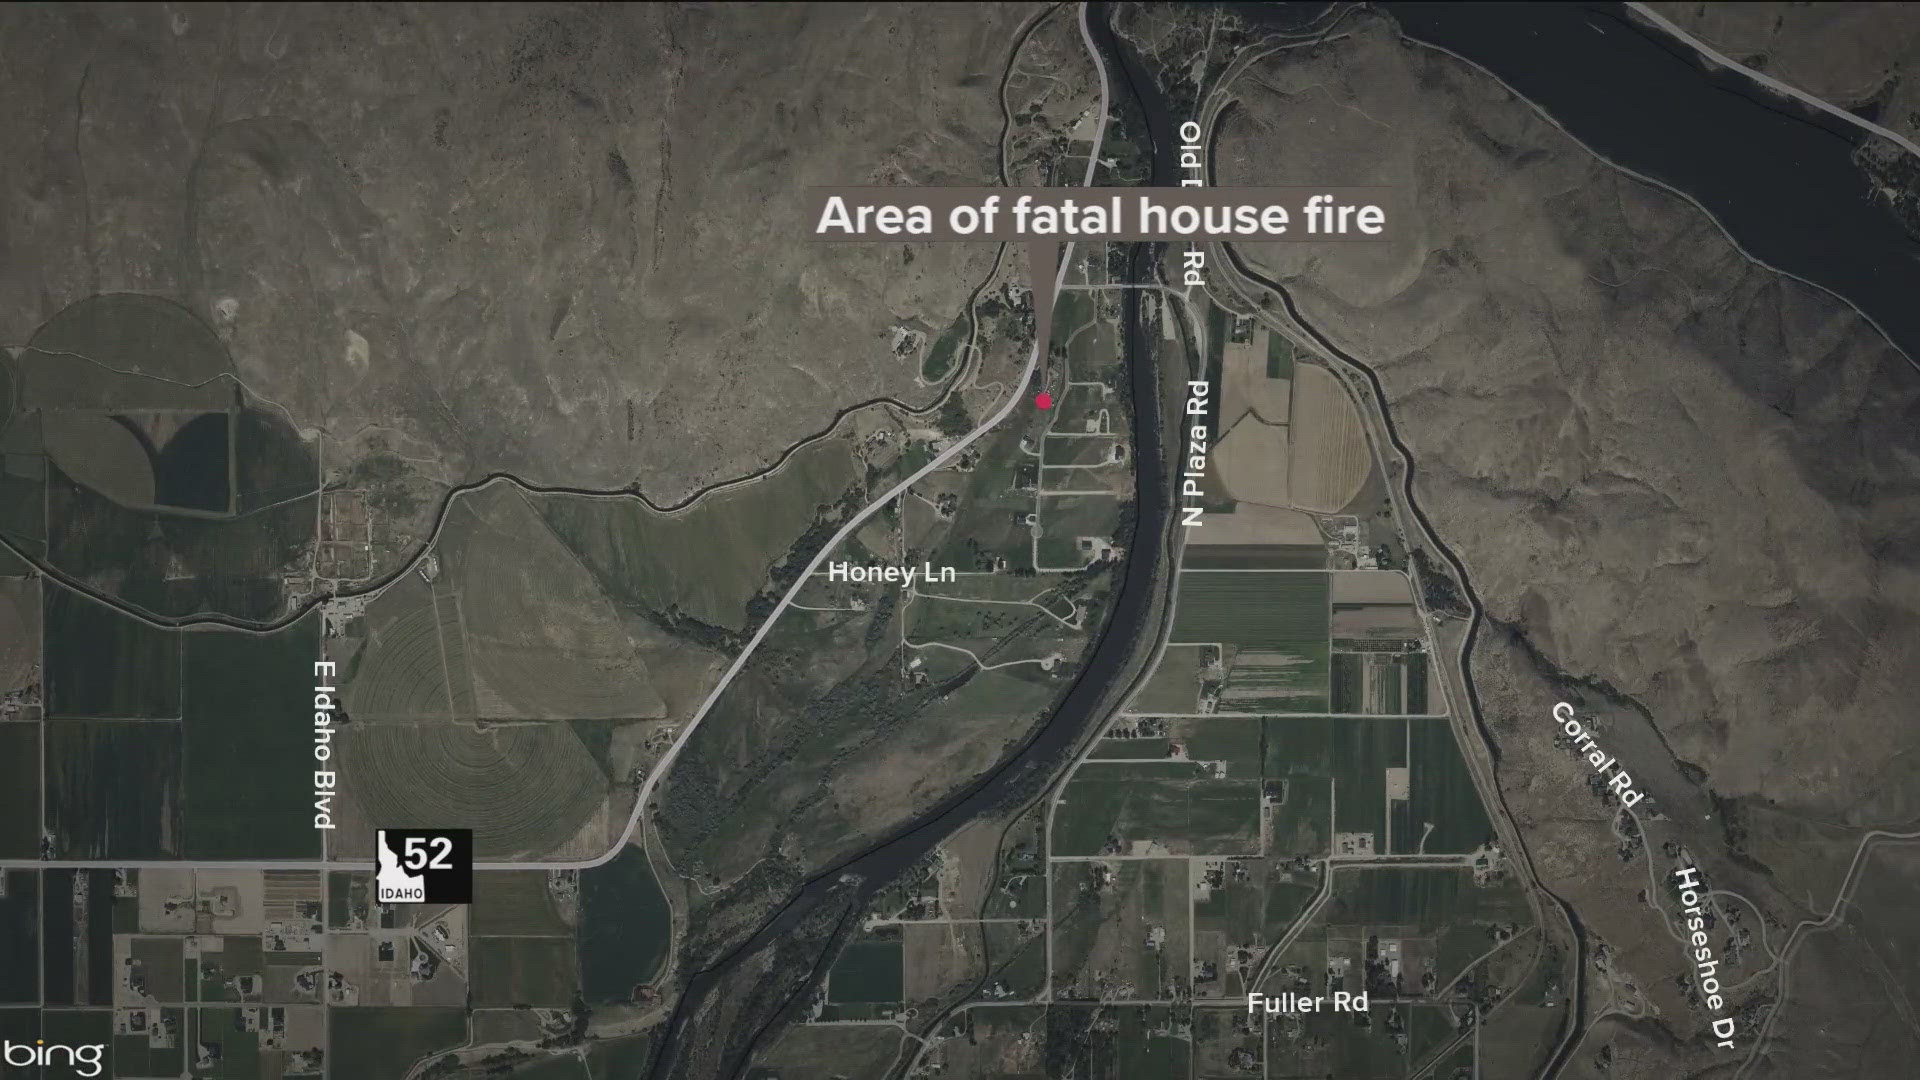 Officials said the woman died the night of the fire. The husband was in critical condition at a Utah hospital, but requested to return to Emmett where he later died.